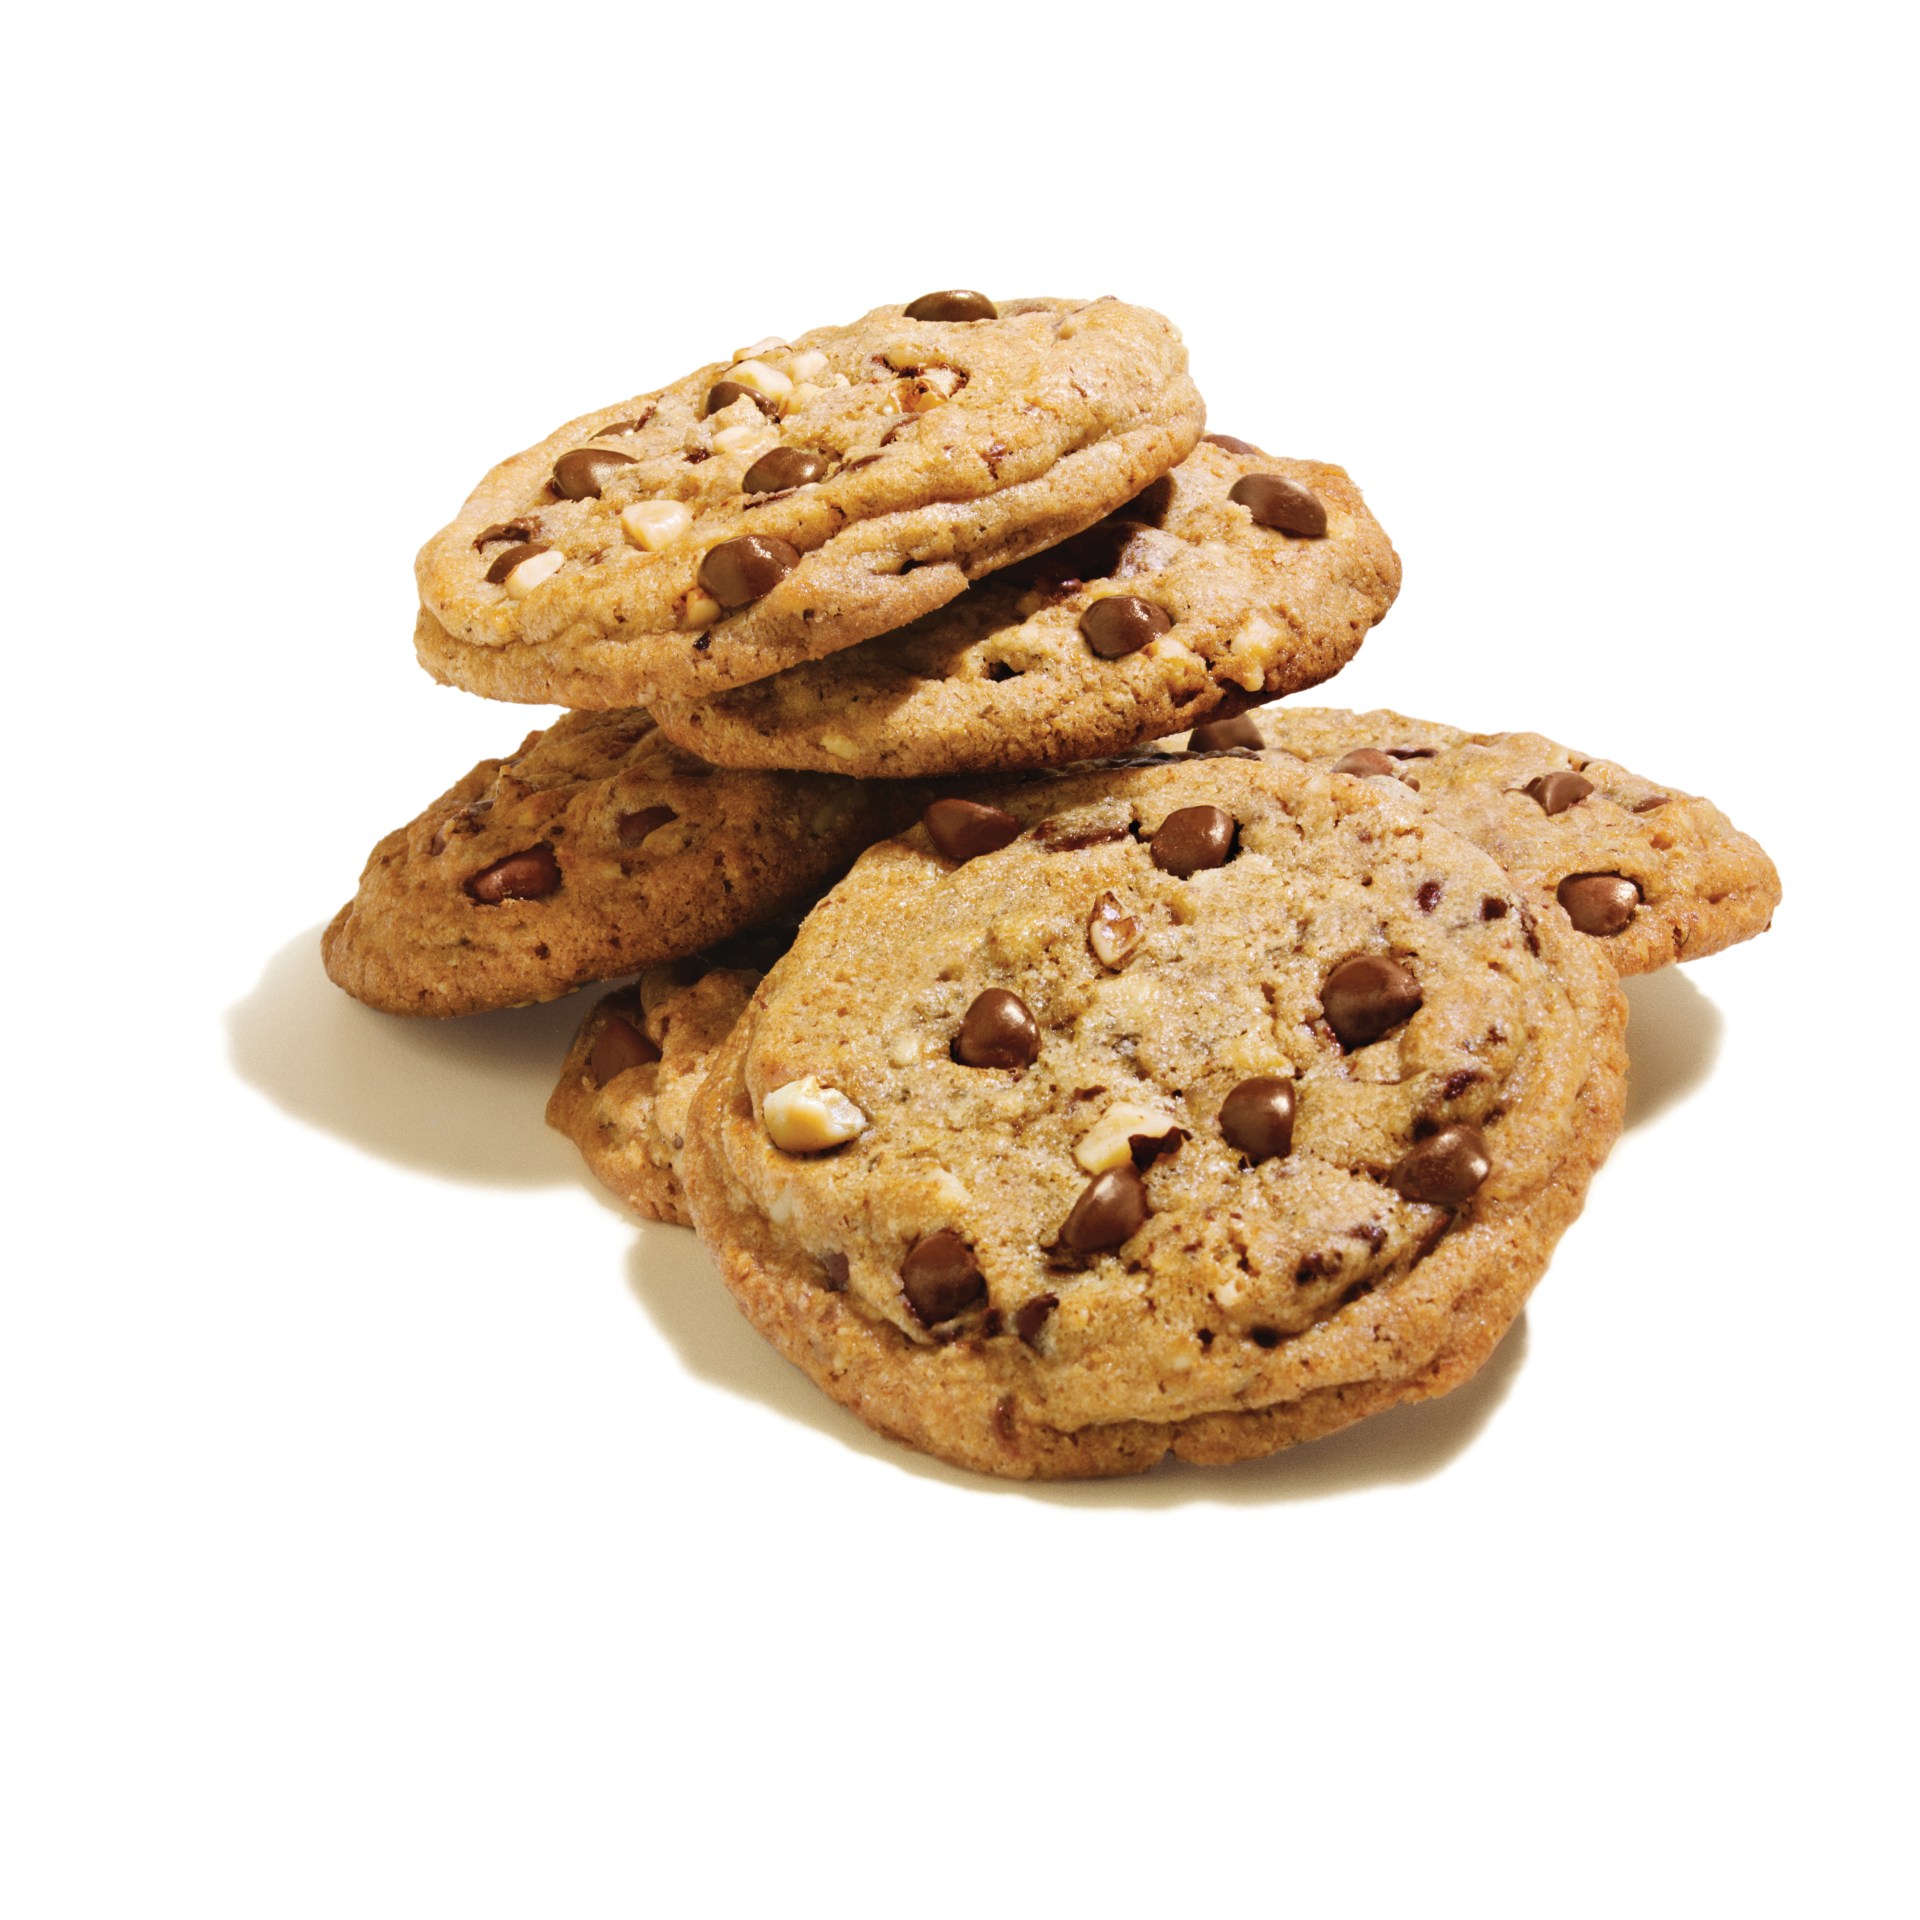 DoubleTree by Hilton’s Signature Chocolate Chip Cookies